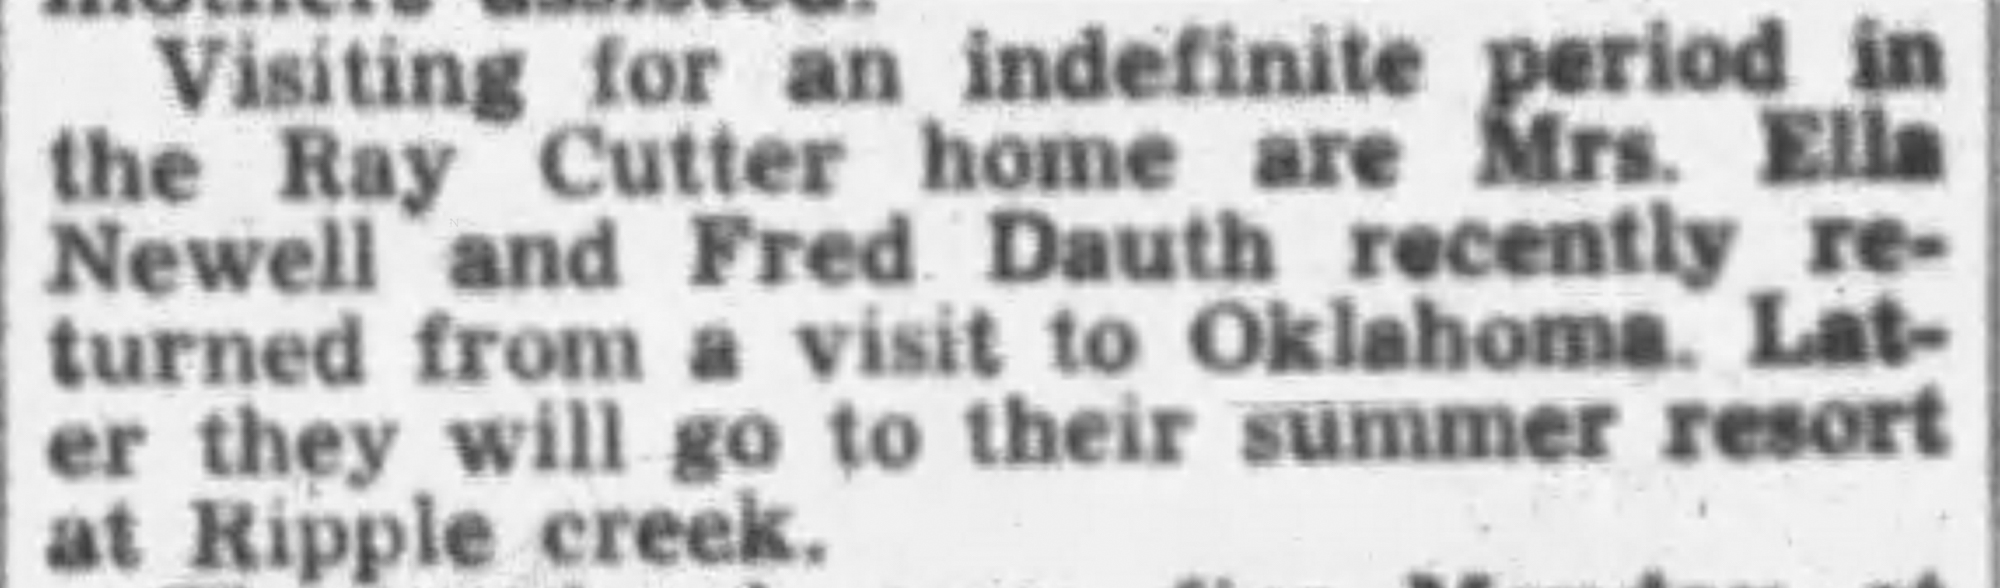 Dauth Family Archive - 1949-04-29 - The Daily Sentinel - Fred Dauth Visiting Ray Cutter Home